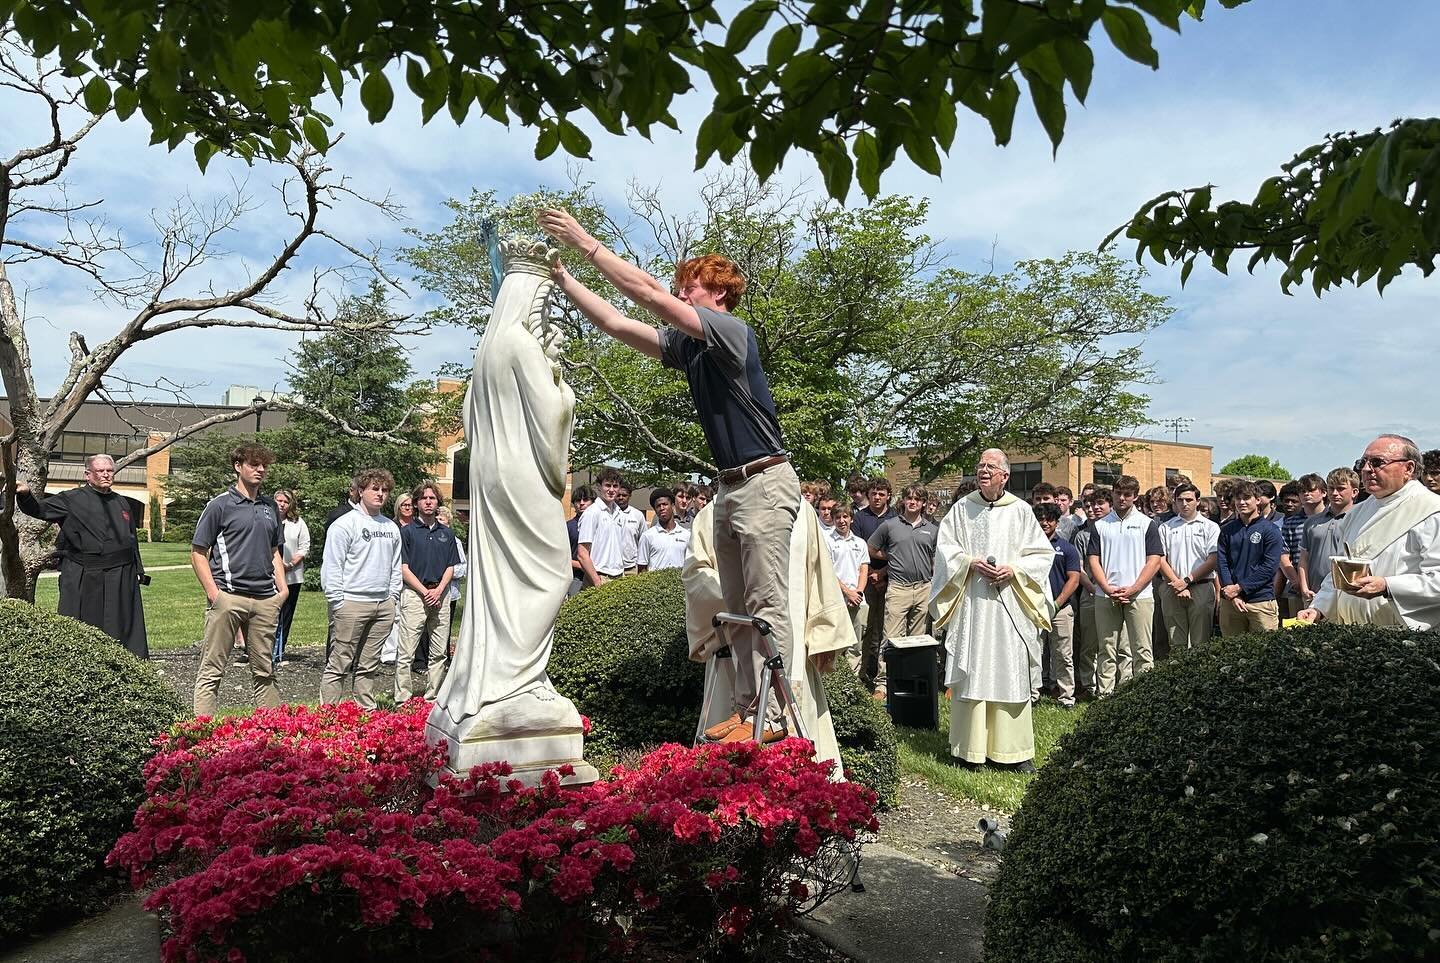 🎶 Immaculate Mary, your praises we sing.
You reign now in Heaven with Jesus our King. 🎶

Yesterday, the Class of 2024 capped off their last Wednesday Mass with the entire school community with the annual May Crowning of Mother Mary. Tristan McLeer 